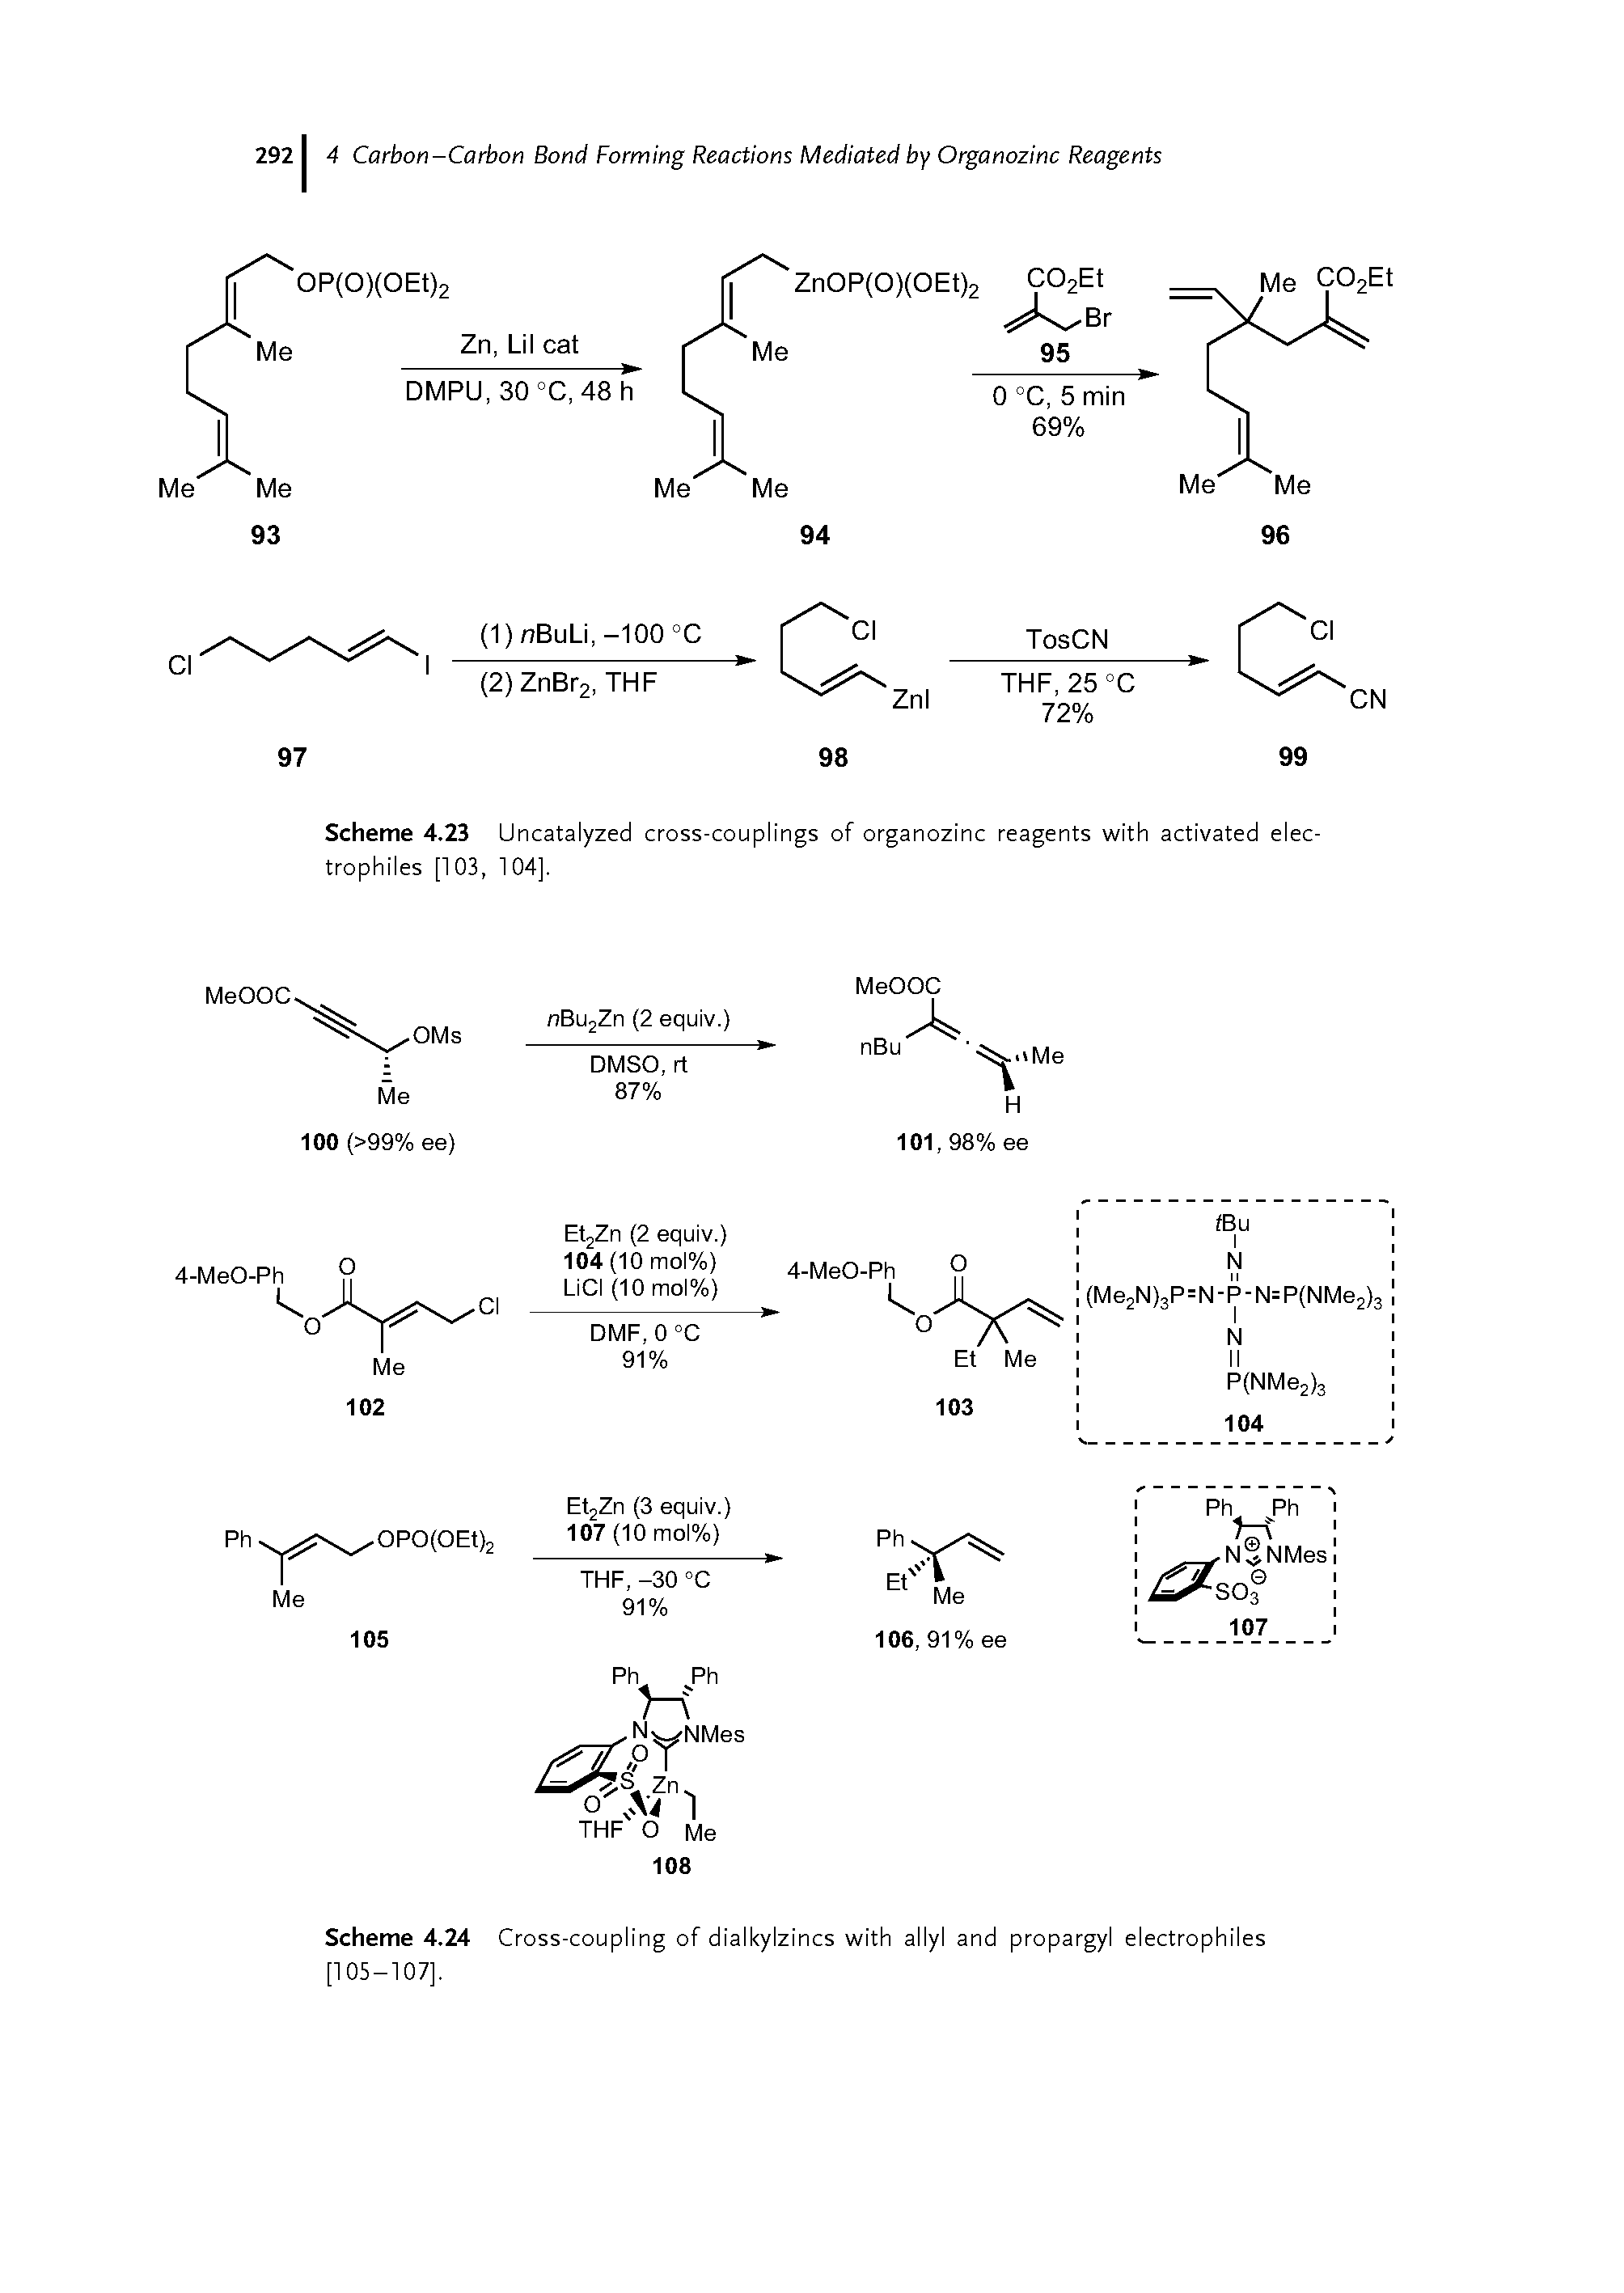 Scheme 4.24 Cross-coupling of dialkylzincs with allyl and propargyl electrophiles [105-107].